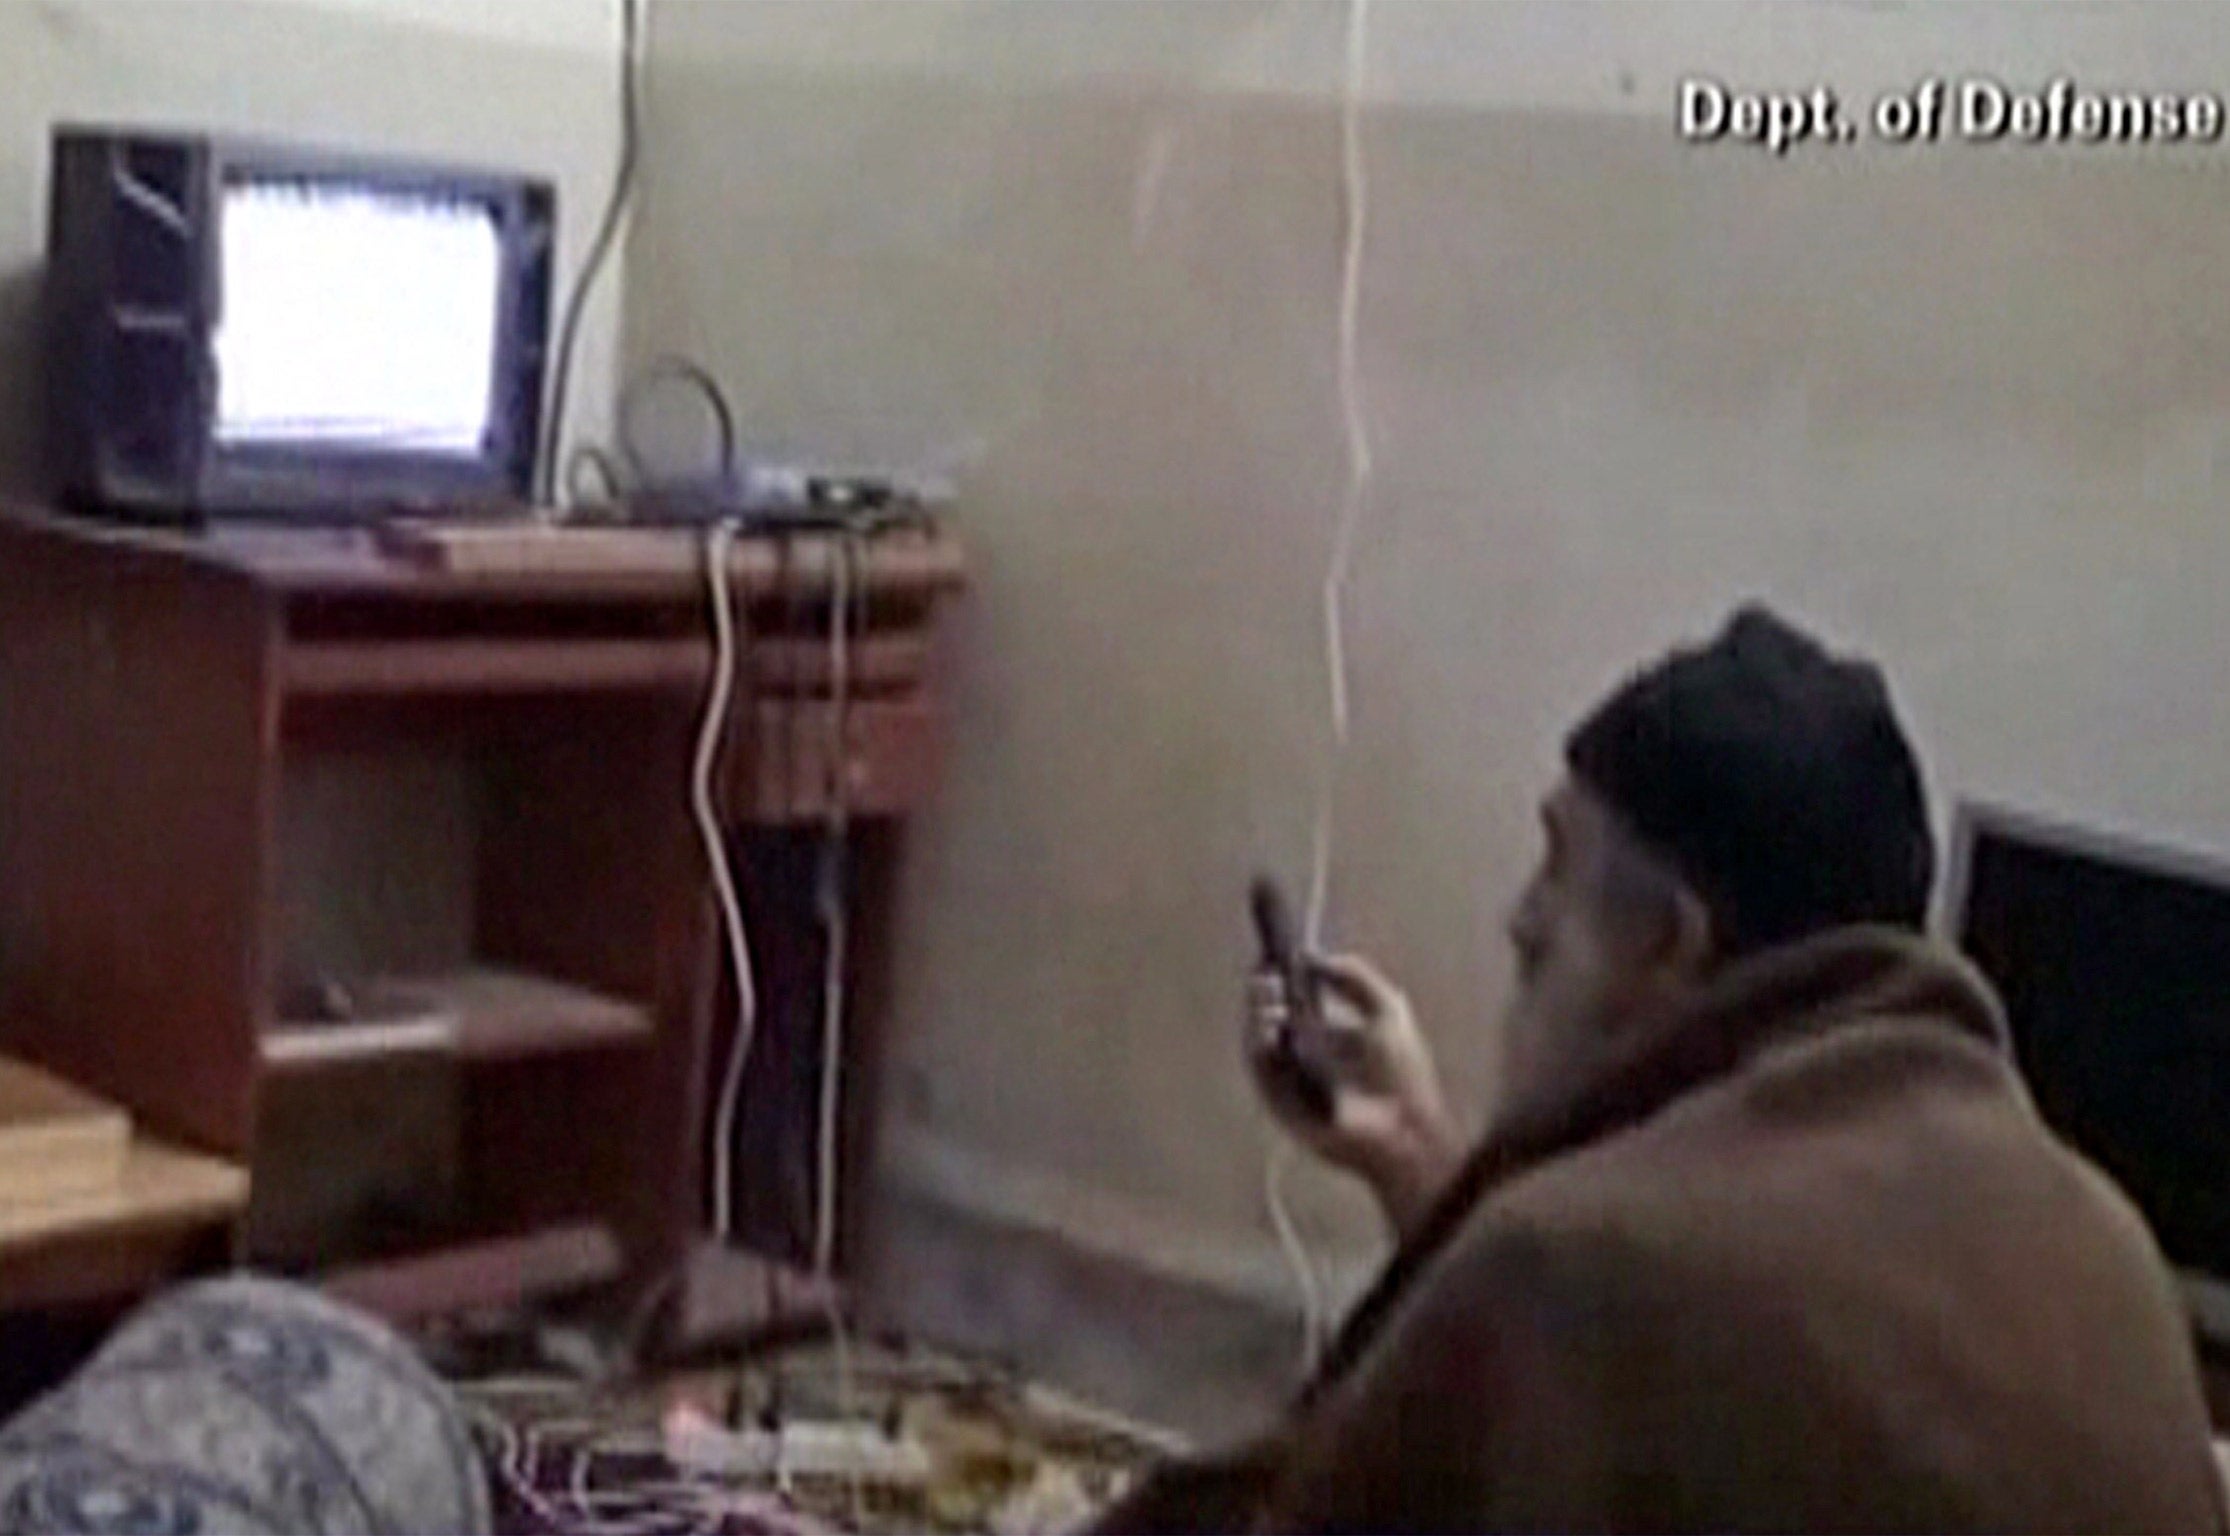 Osama bin Laden watching television at his compound in Abbottabad